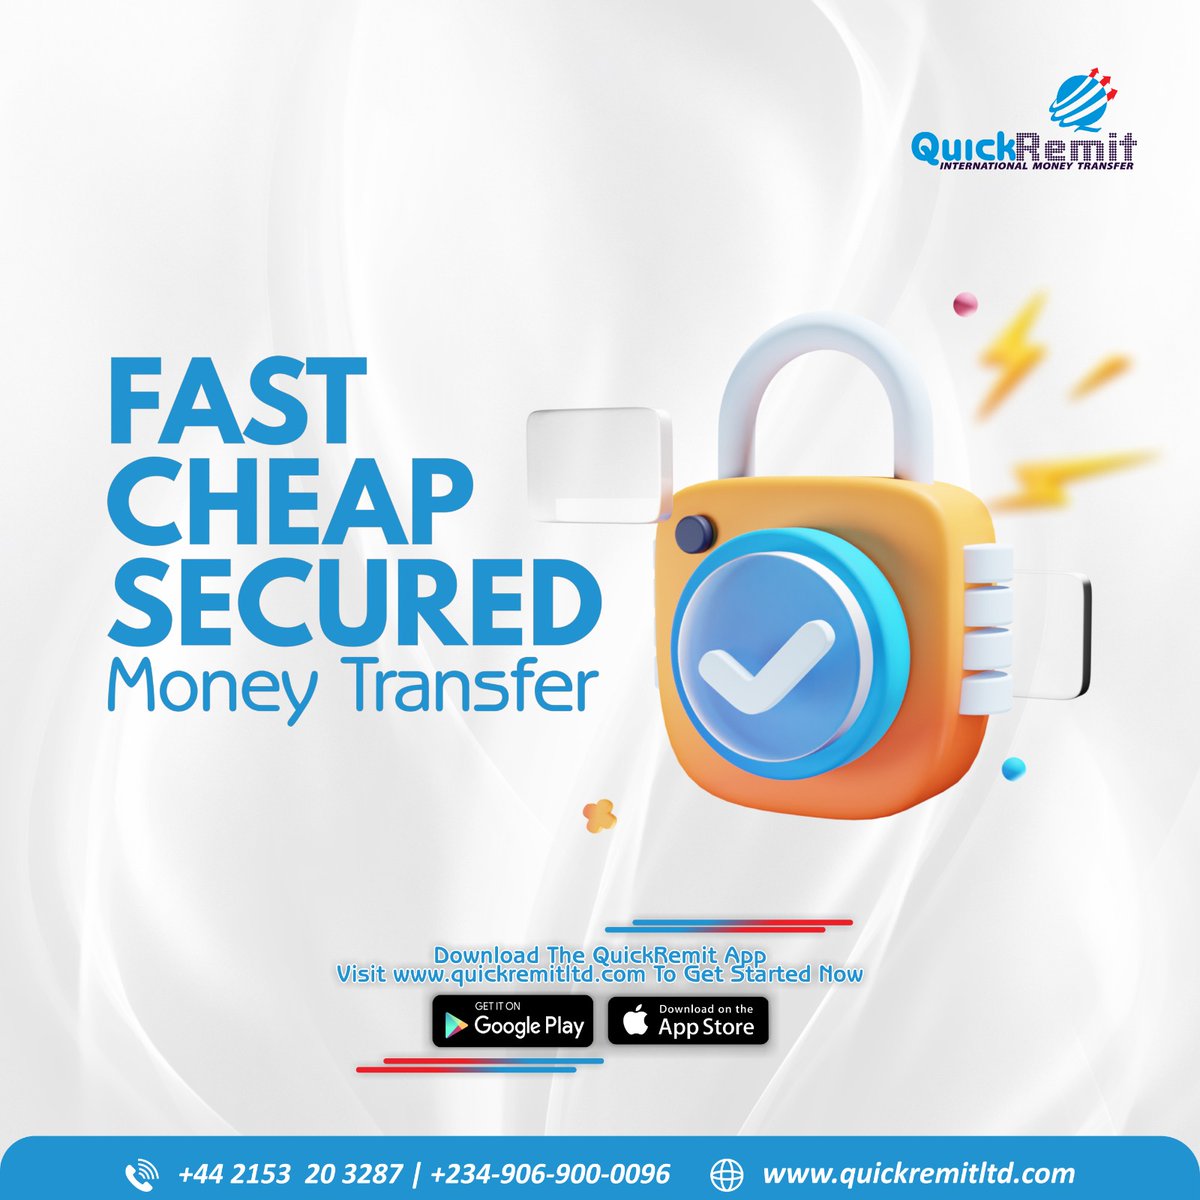 Send seamless money transfers back home for less with QuickRemit

Download our secure app now to start sending quick and cost-effective money transfers from the UK to Nigeria.

Available on Google and IOS Stores

#QuickRemit #Transferwithease #UKtoNigeria